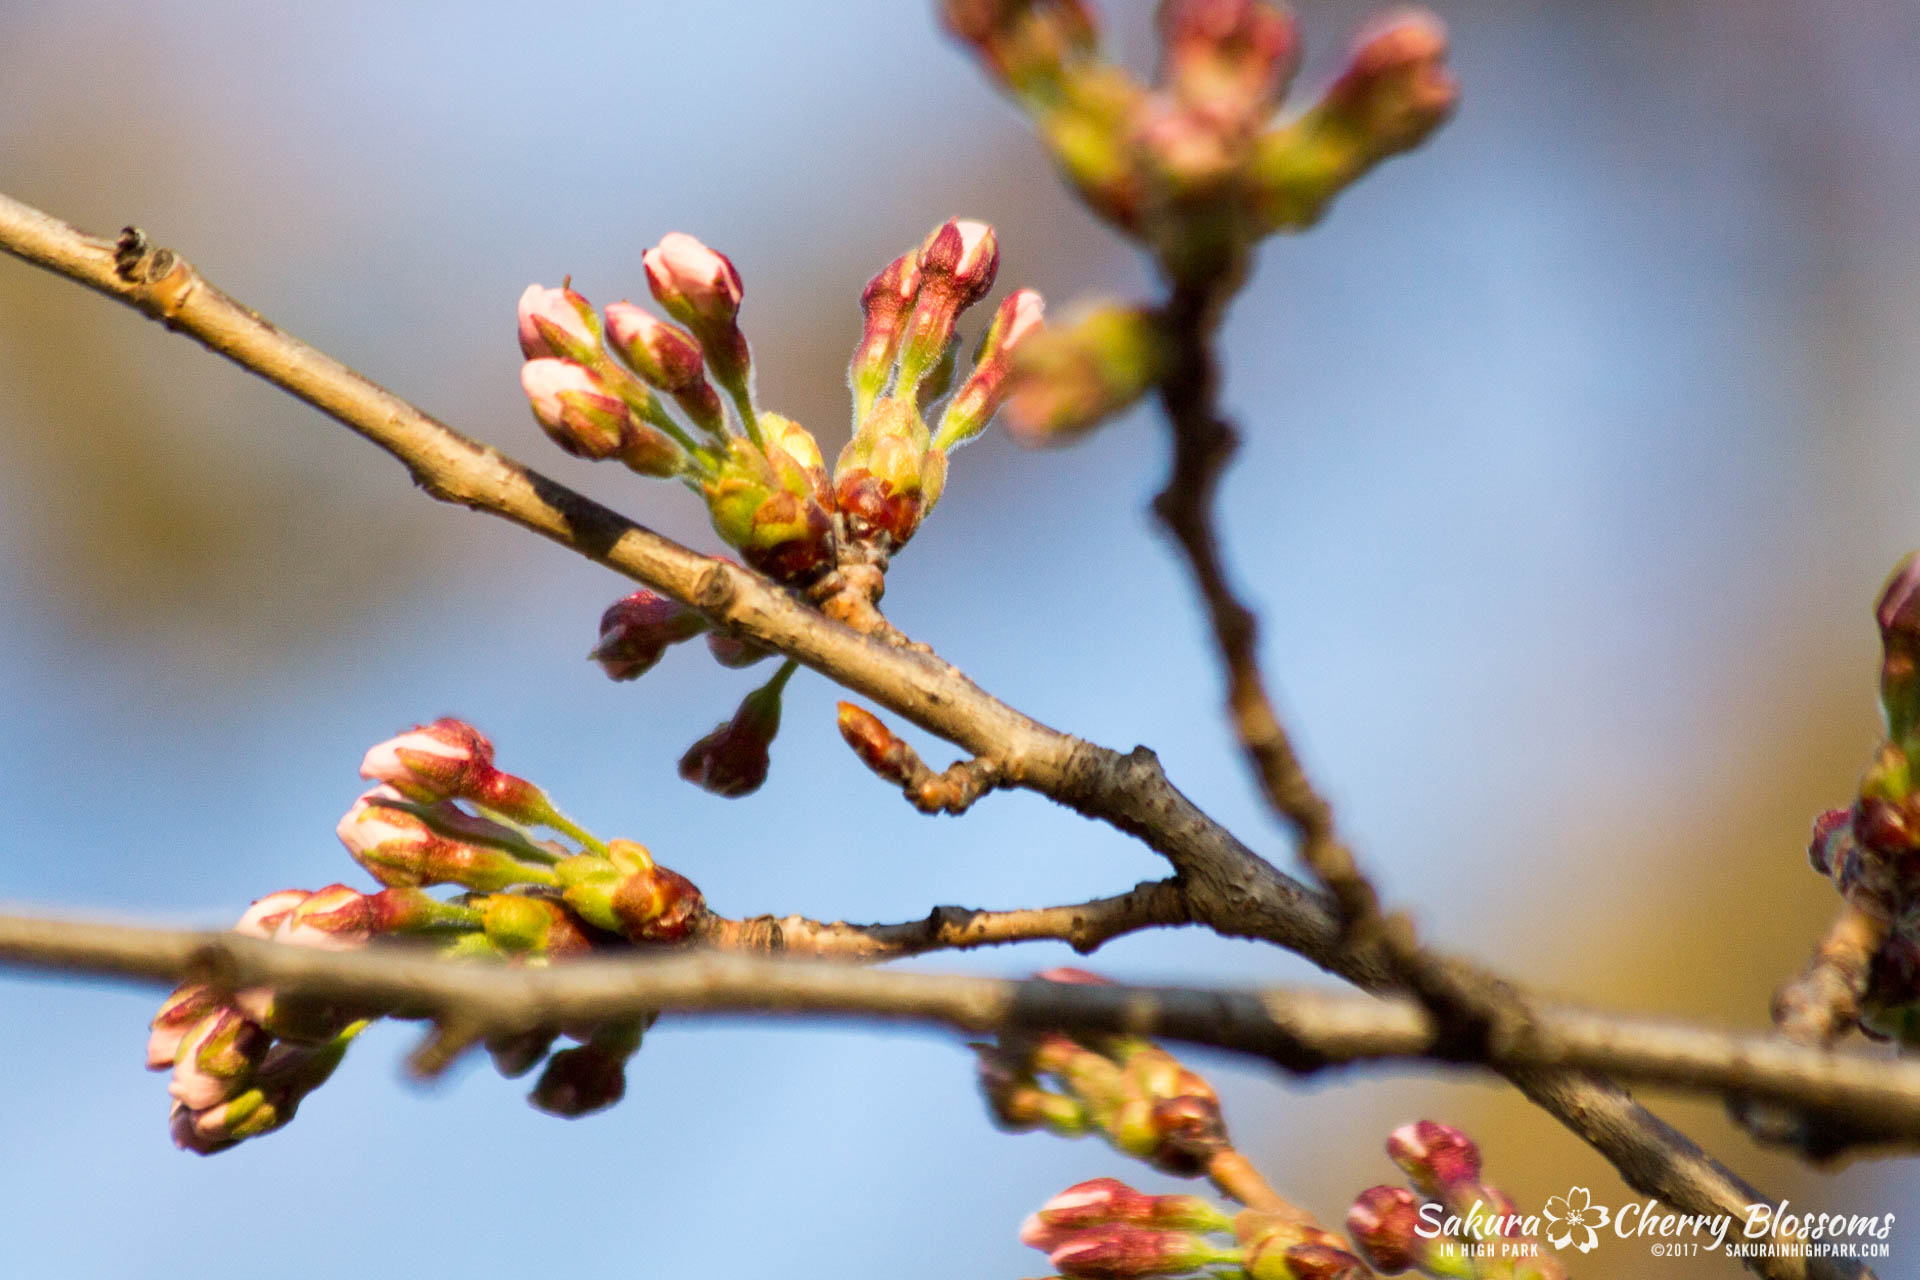 Sakura-in-High-Park-April-17-2017-florets-are-emerging-from-the-buds-throughout-the-park-68.jpg